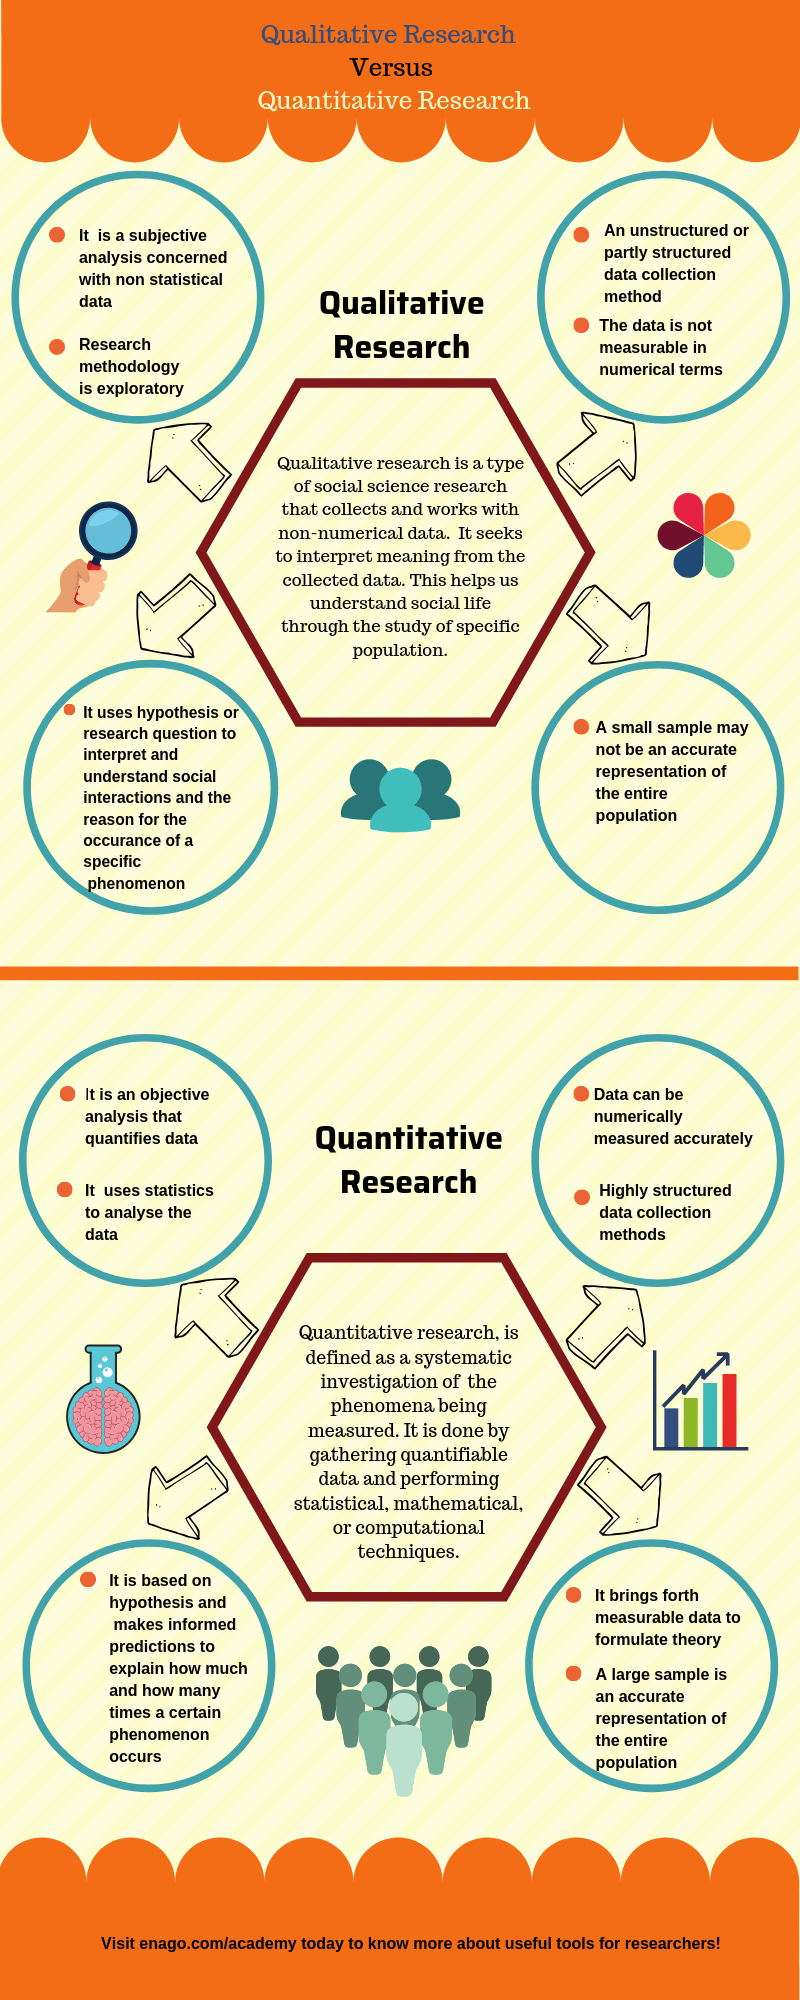 importance of qualitative and quantitative research in education